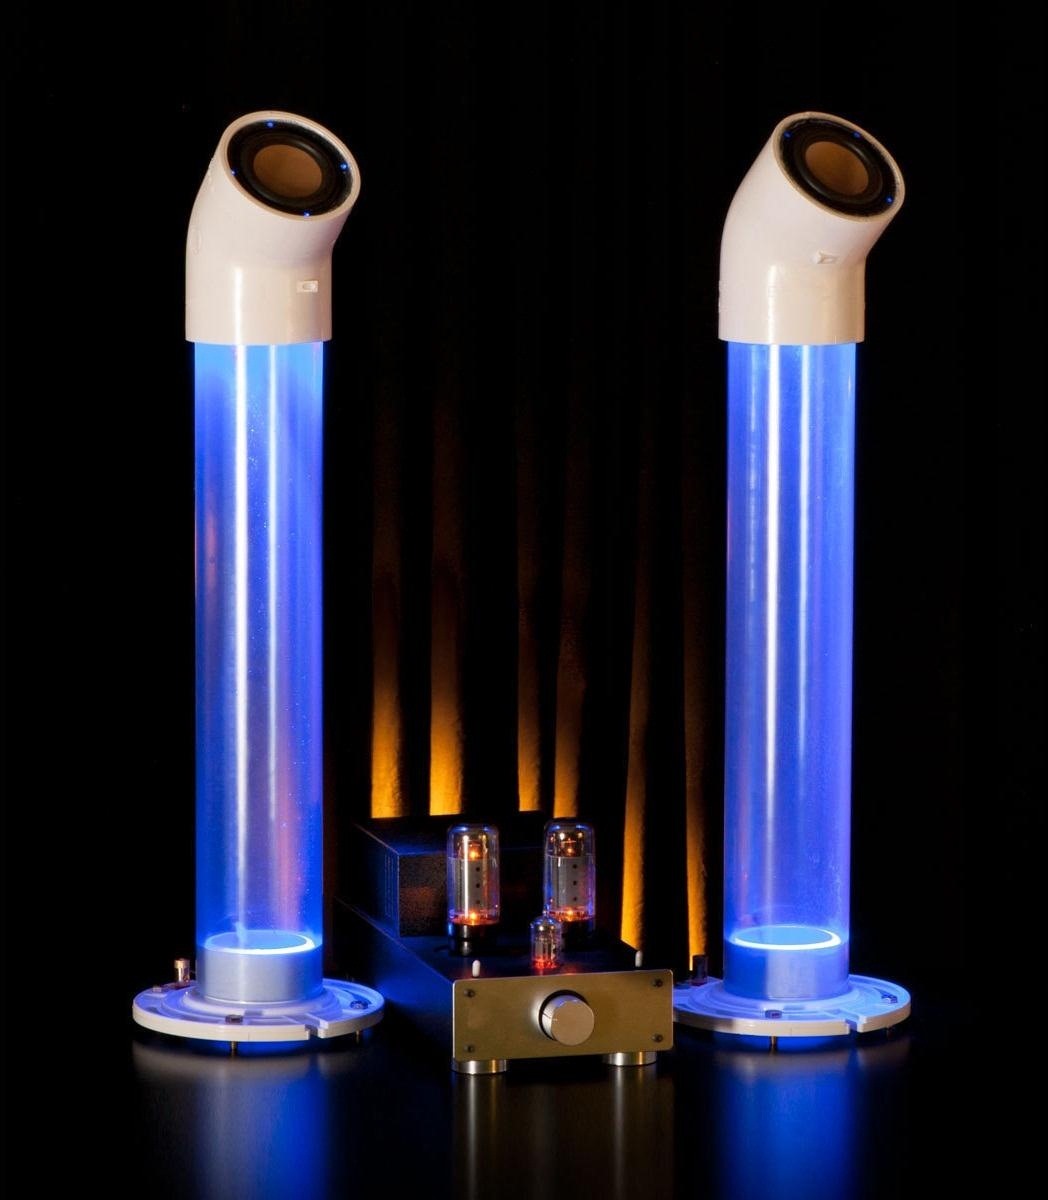 DIY Pulsating Light Rod Speakers That Dance to Your Music